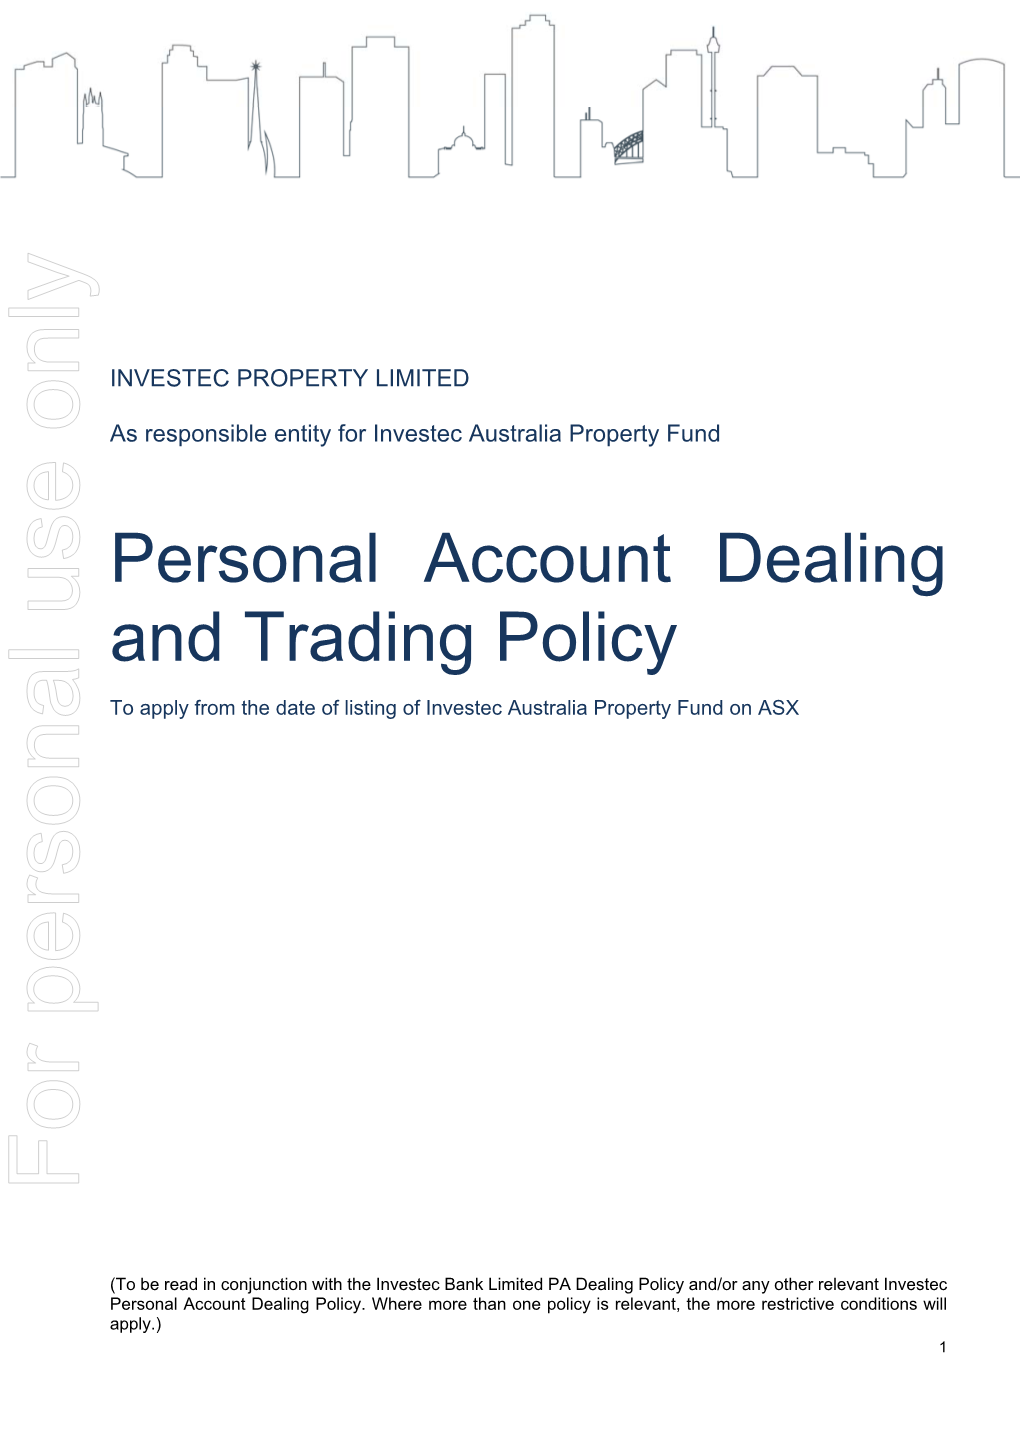 Personal Account Dealing and Trading Policy